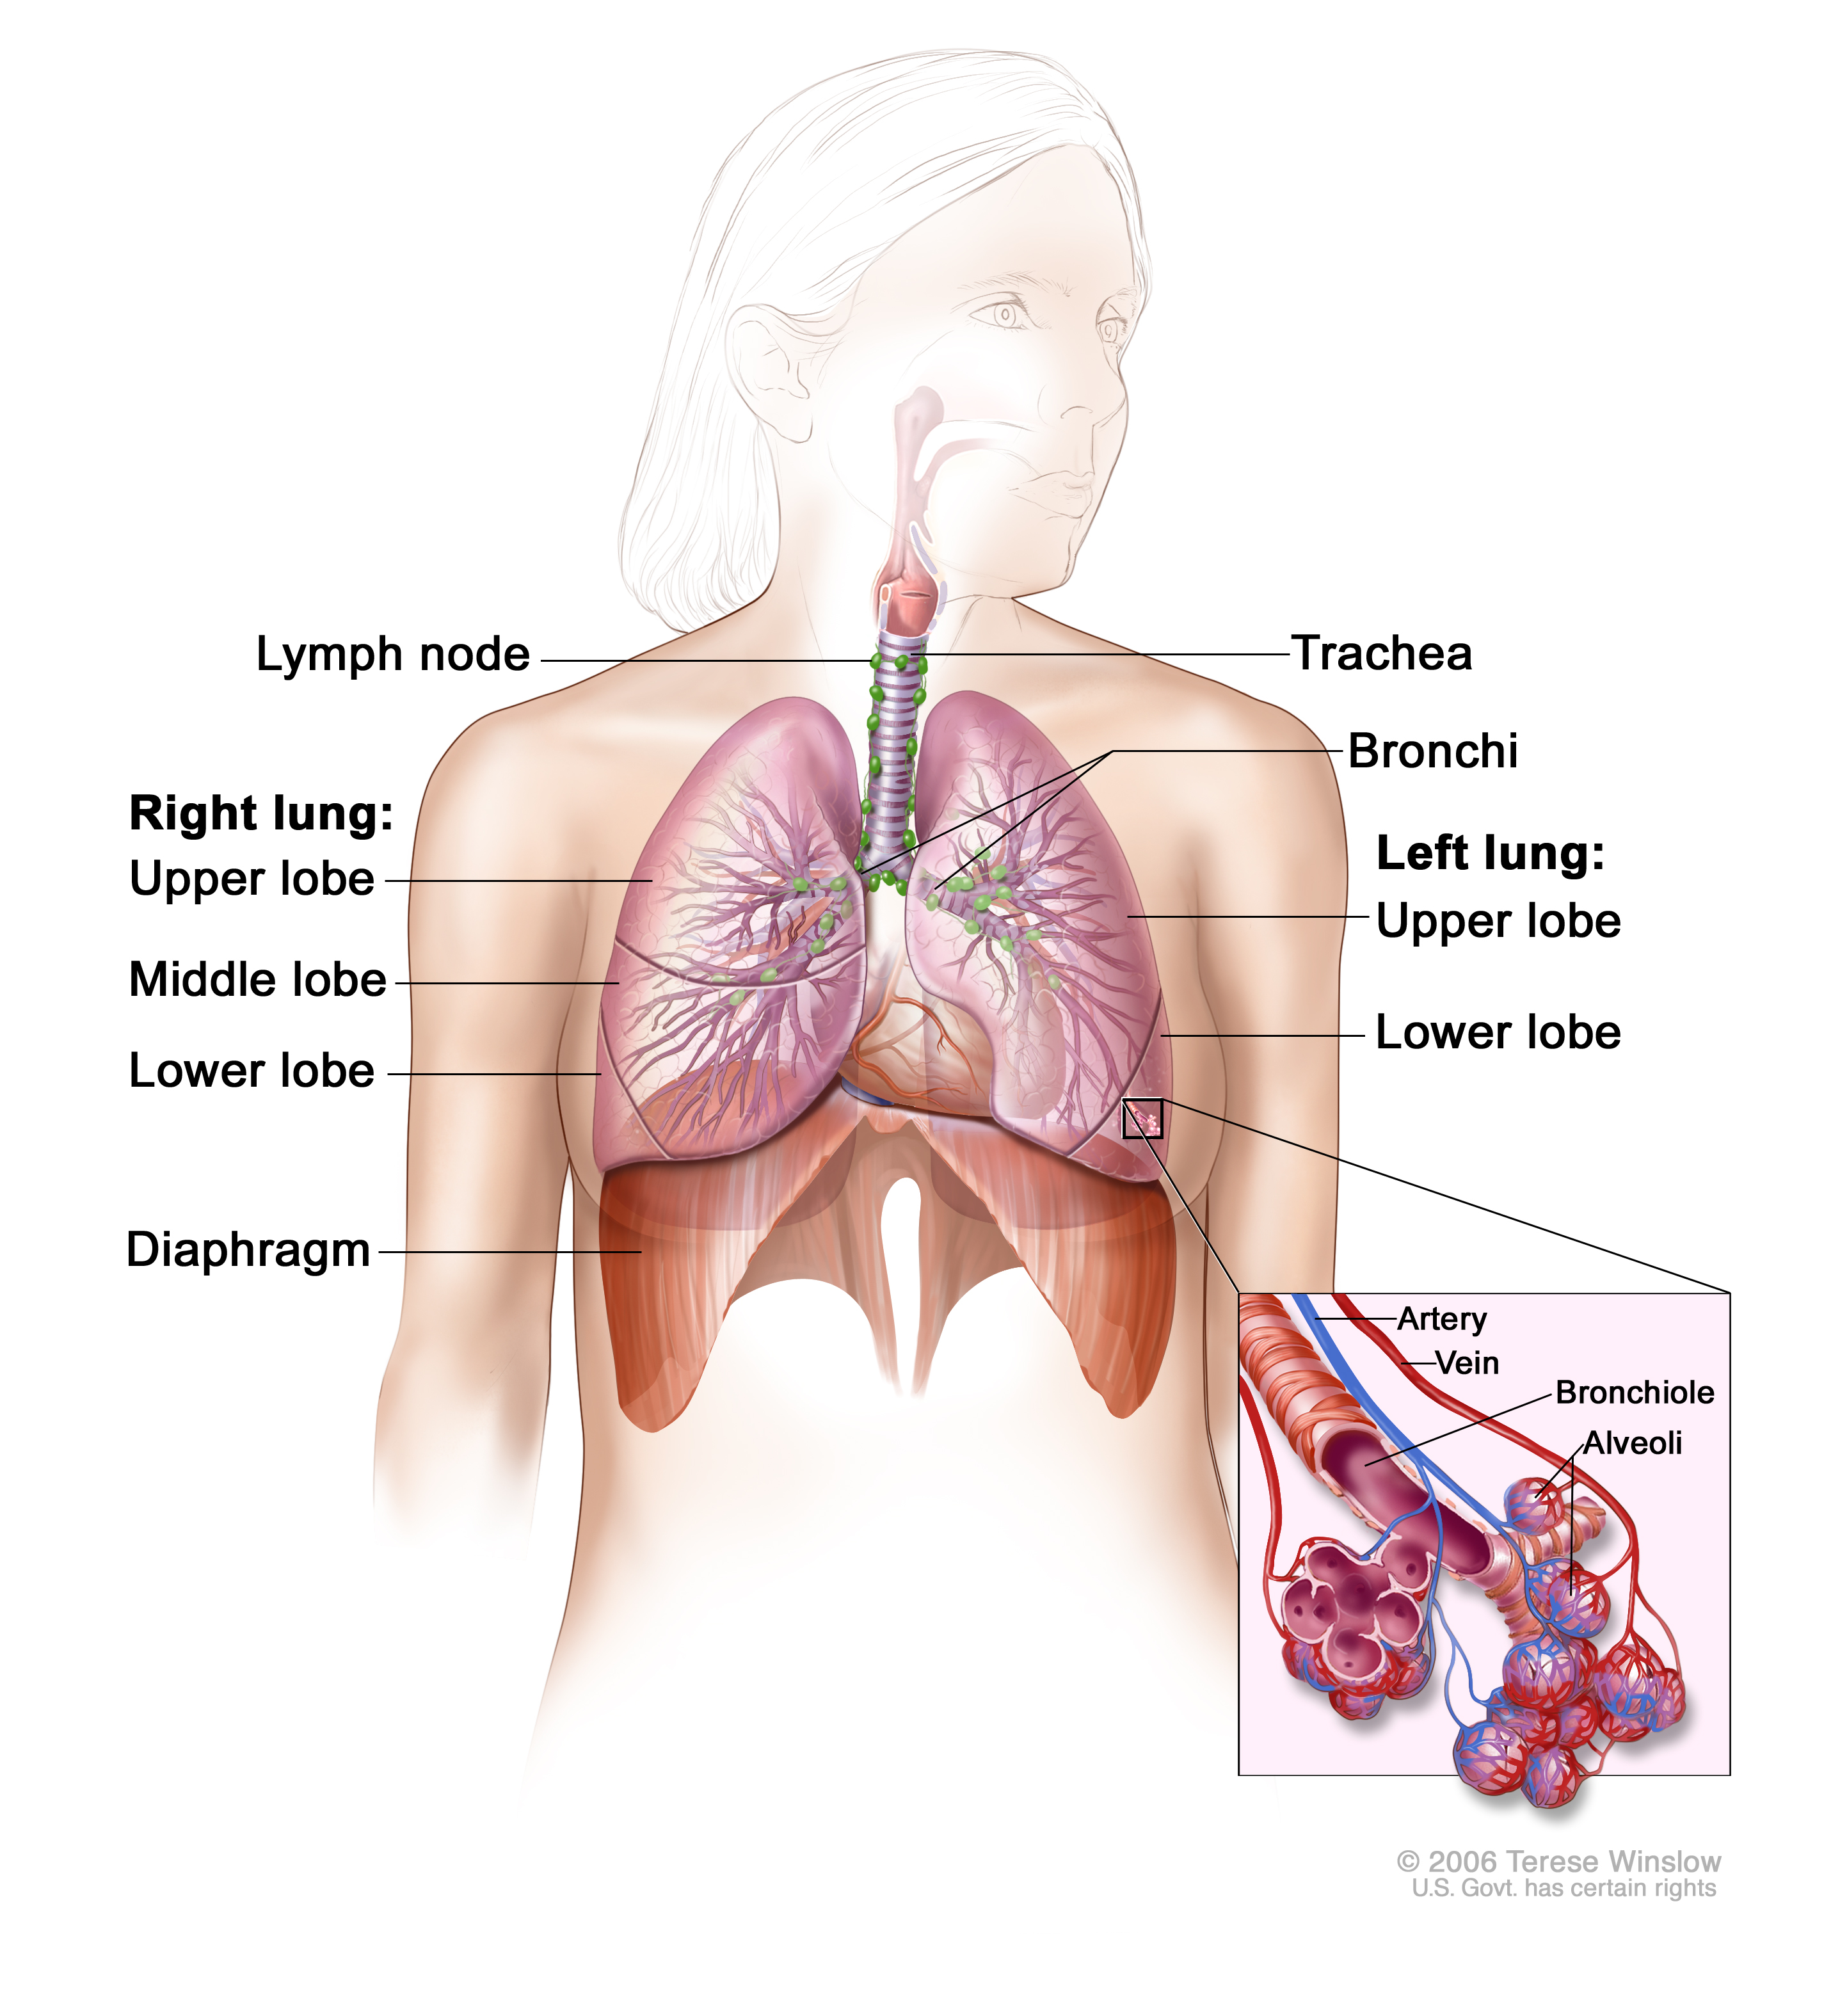 A diagram of women's lungs and the surrounding organs.